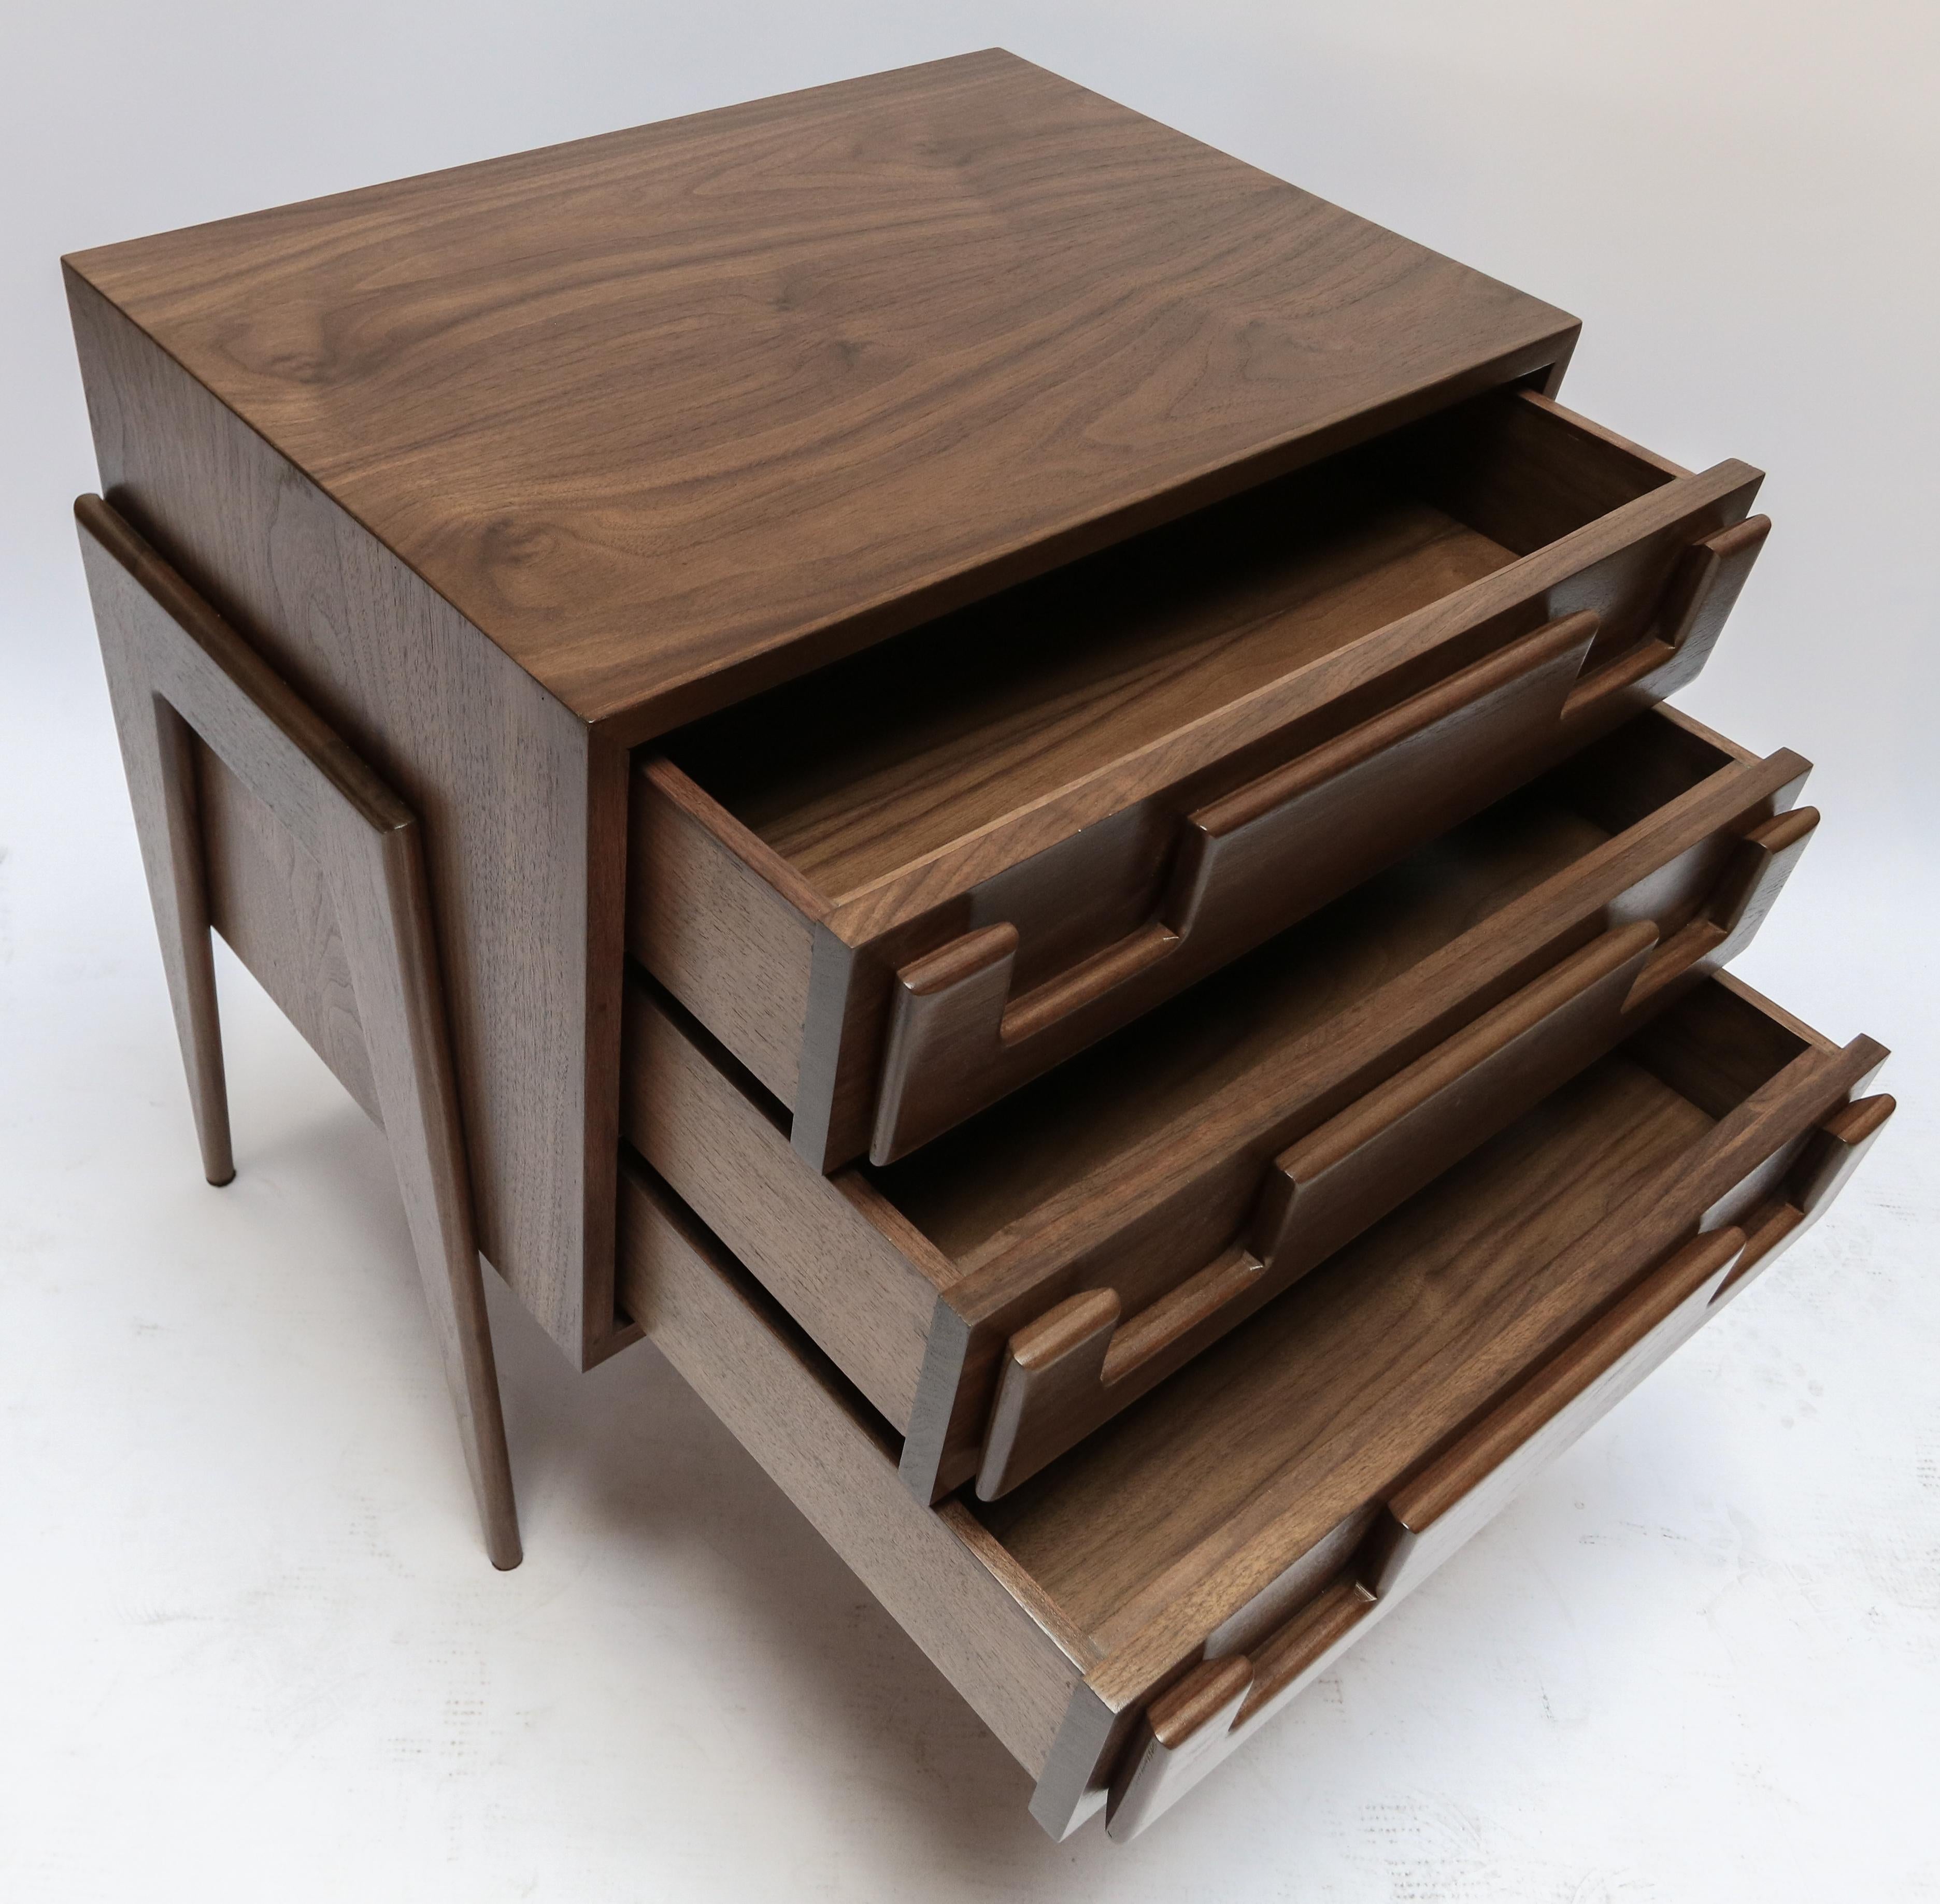 Custom Midcentury Style Walnut Nightstands with Three Drawers by Adesso Imports For Sale 4